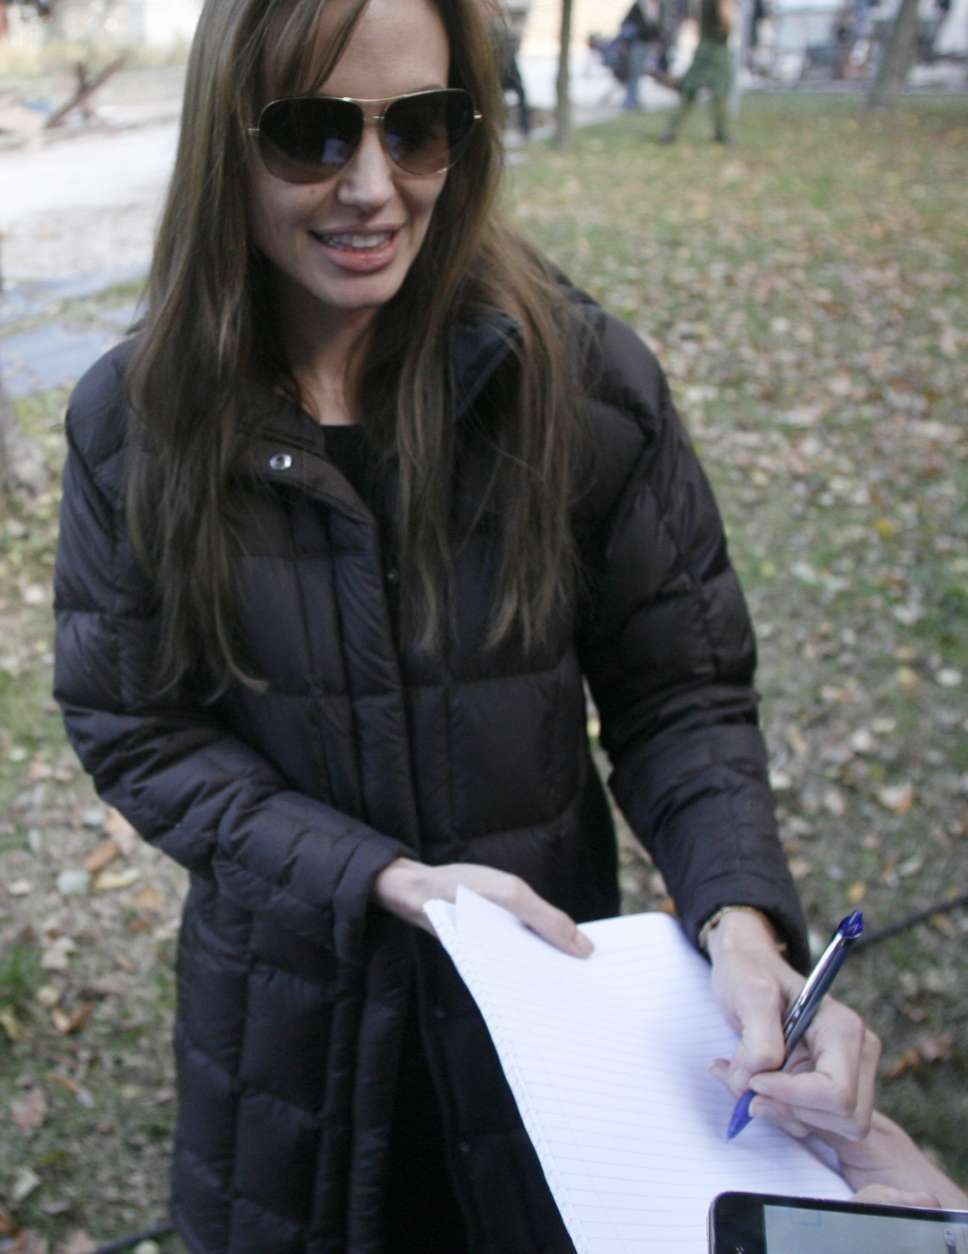 FILE - US actress Angelina Jolie signs autographs for fans during the shooting of her directorial debut, a film called 'Untitled Bosnian War Love Story' in Budapest, Hungary, in this Wednesday, Oct. 13, 2010 file photo. Bosnian authorities have denied Jolie a permit to shoot her directorial film debut in the country amid protests by rape victims who object to its alleged subject matter. J olie's Sarajevo  producer, Edin Sarkic,  said  Friday  Oct 15 2010 that the rumors were not true. He says he has re-submitted the application and sent the film's full script to Sarajevo's  Culture Minister and expects to get a permit. (AP Photo/MTI, Bea Kallos, Pool, file)